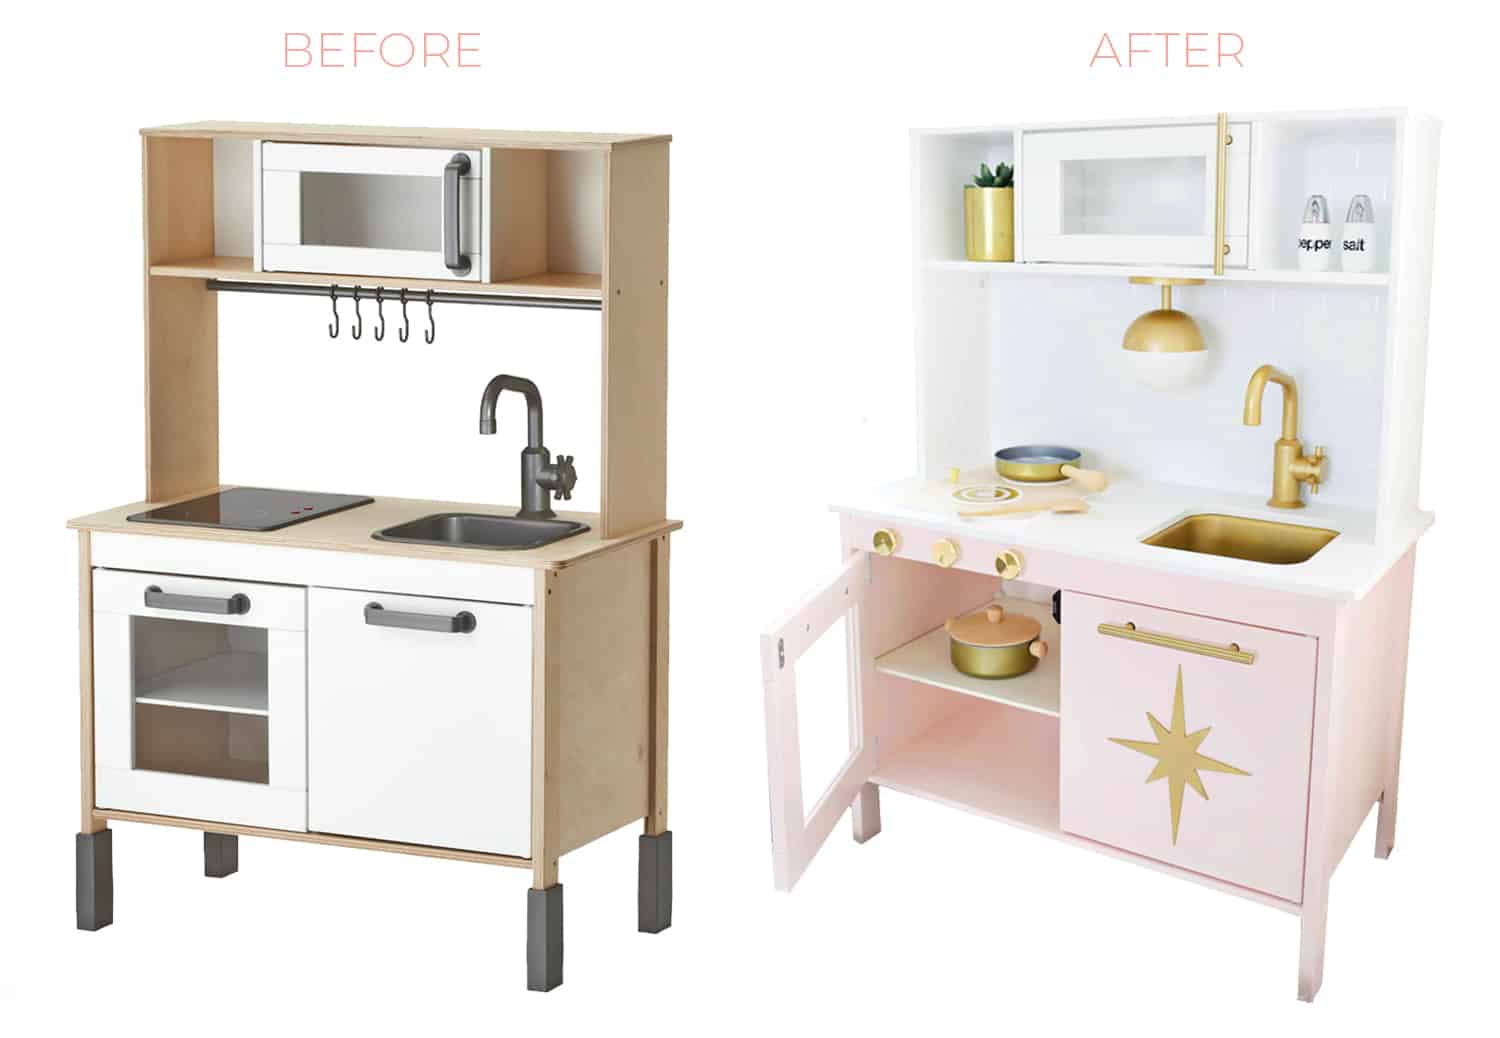 https://www.atomic-ranch.com/wp-content/uploads/2018/09/Mid-Century-Modern-Ikea-Play-Kitchen-Hack-click-through-for-more-1-24.jpg